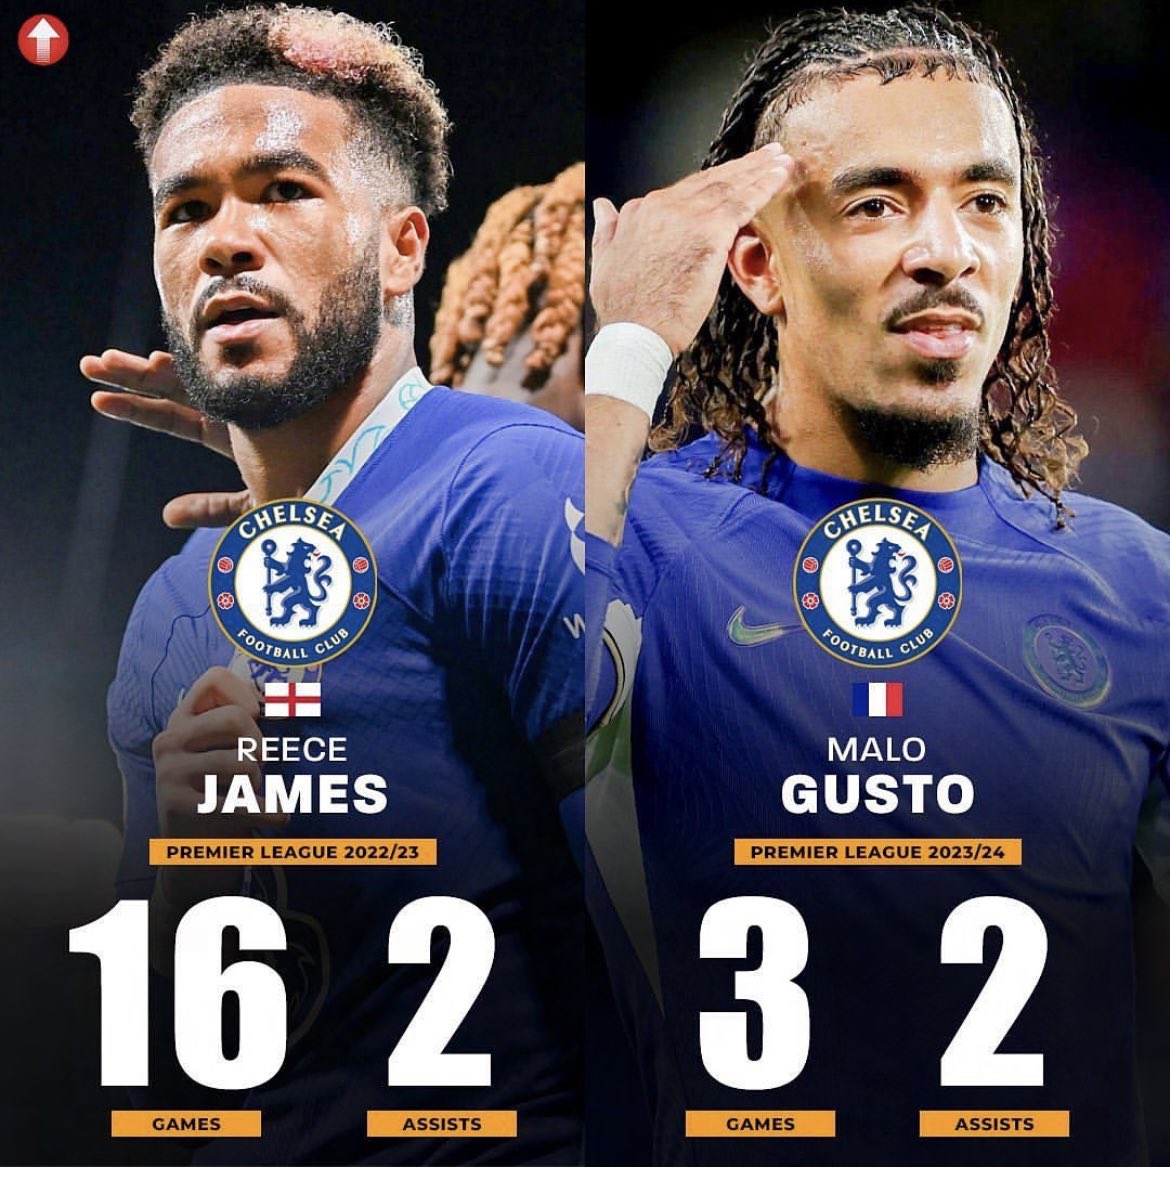 Malo Gusto stats compared to Reece James for Chelsea this year.